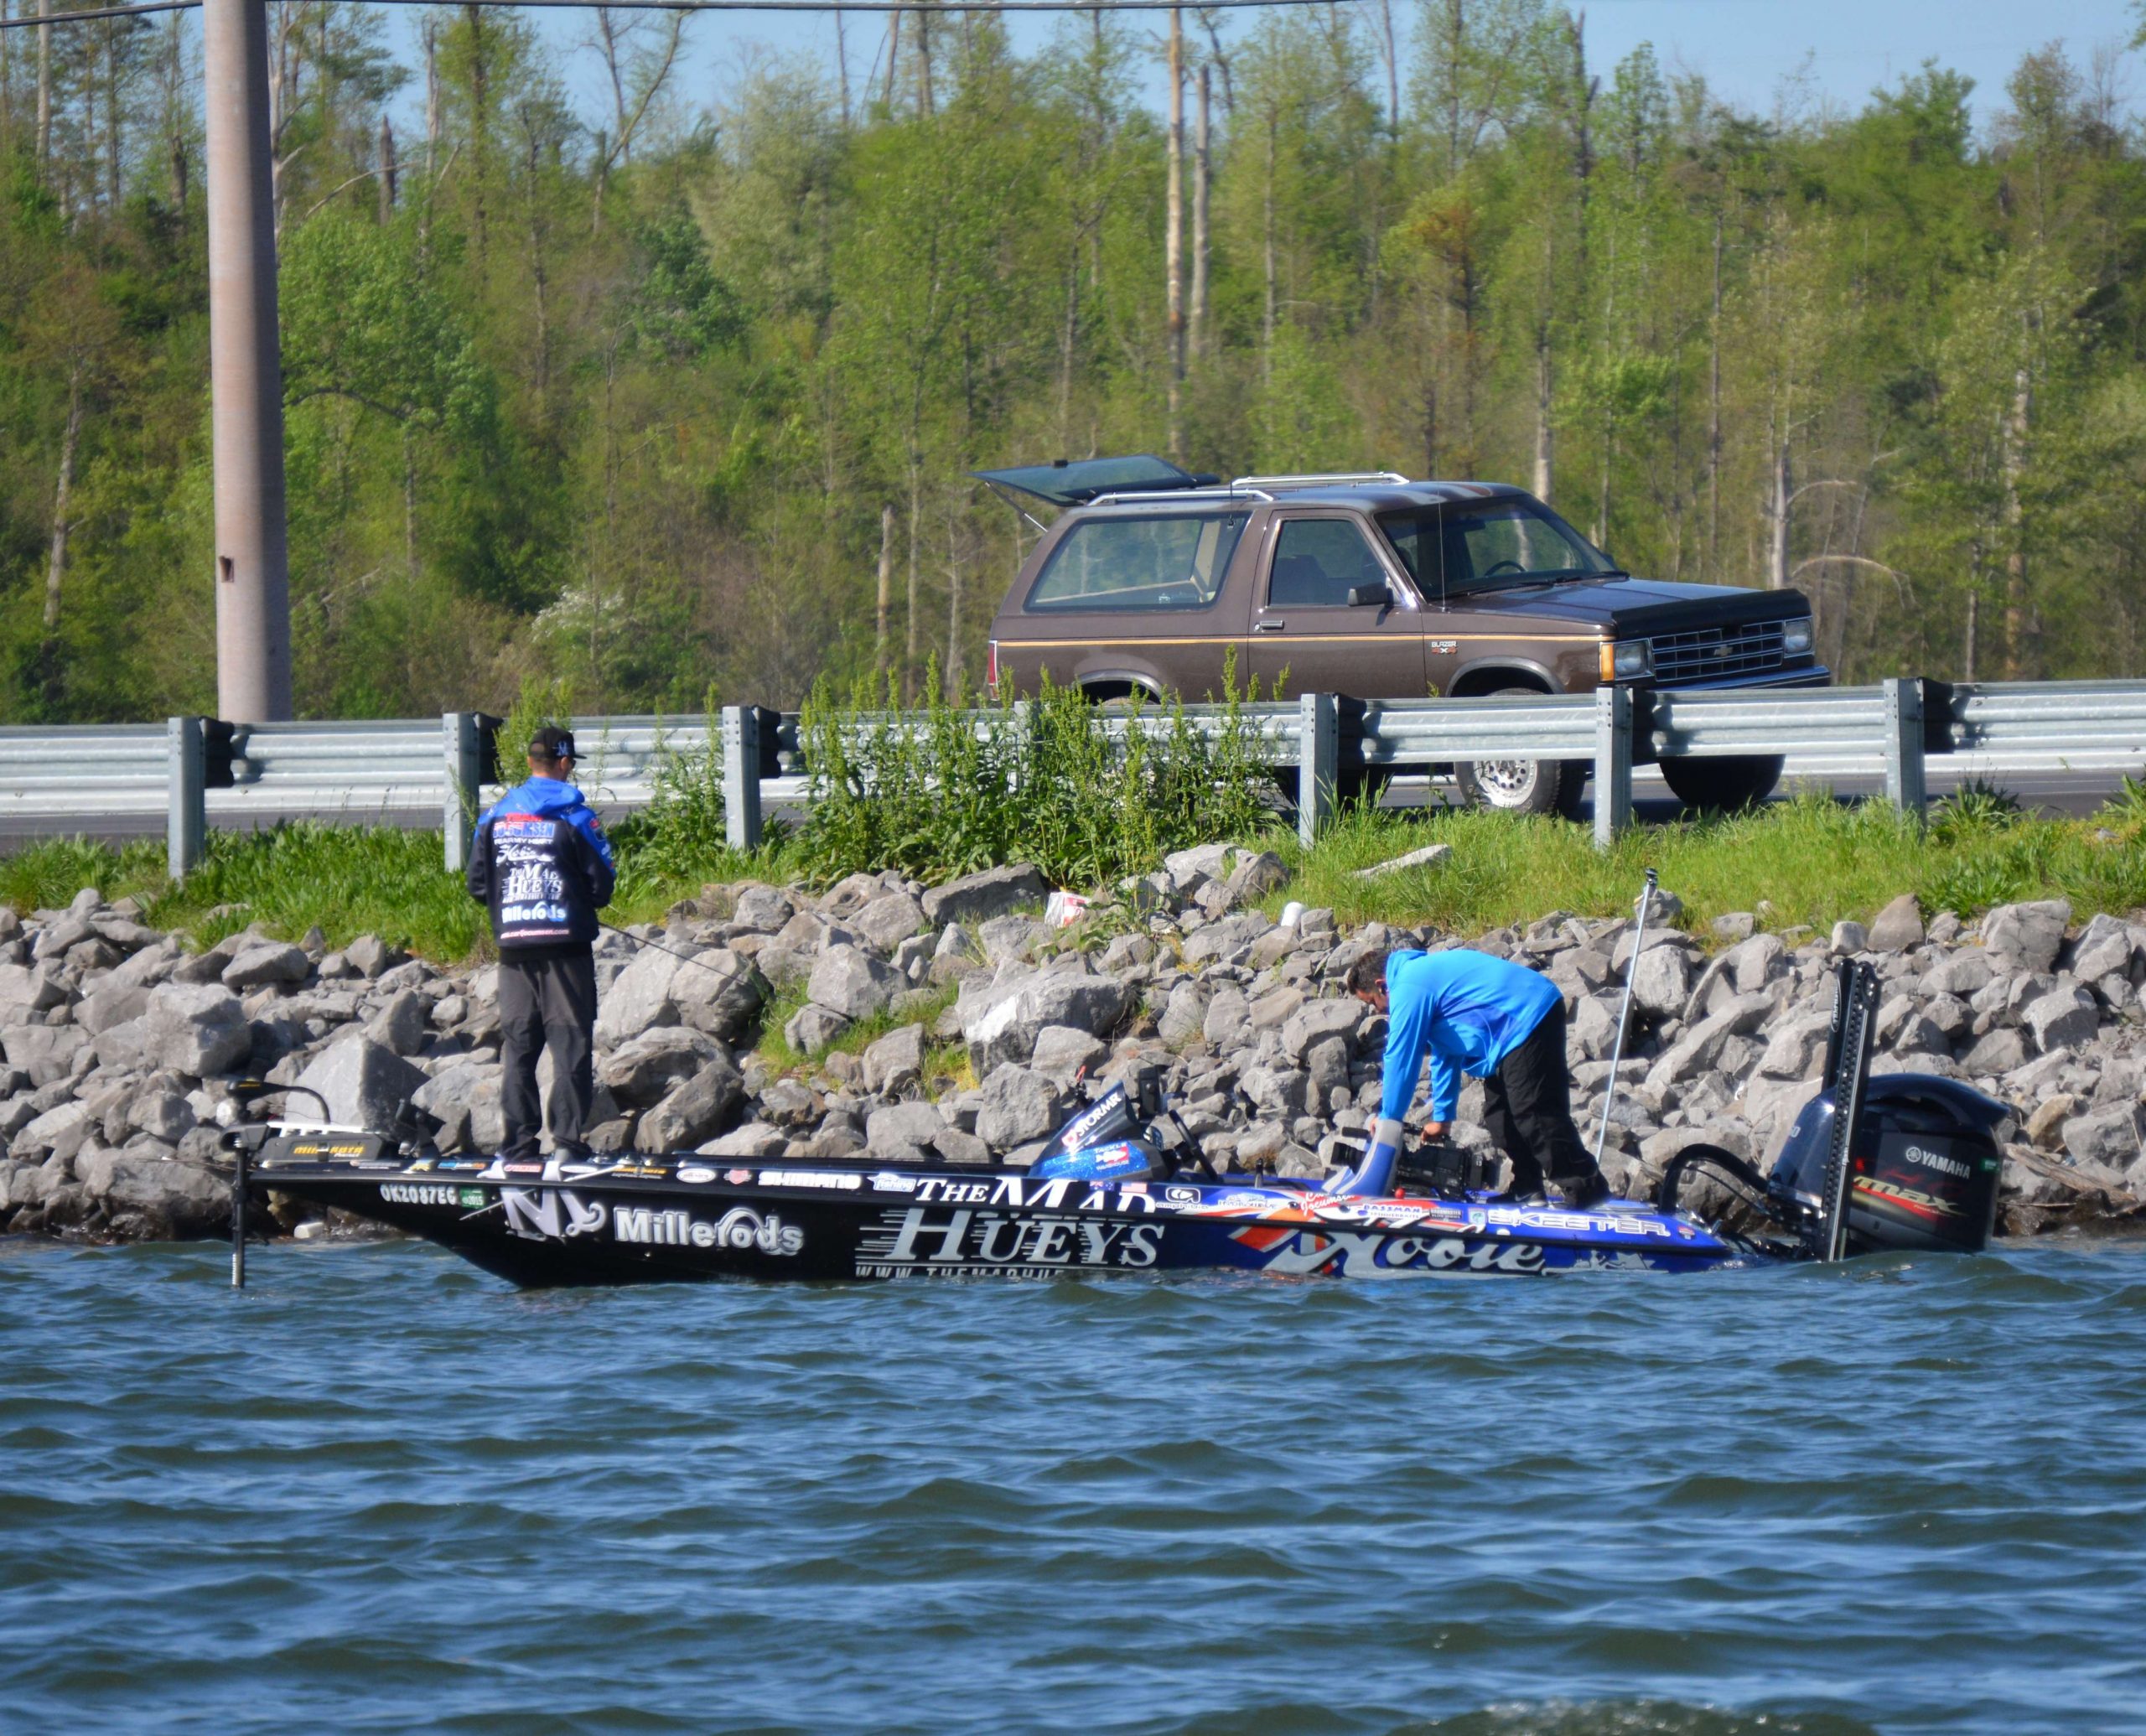 Carl Jocumsen was the first angler we came up on. Jocumsen has been in or near the Top 5 since this tournament began.